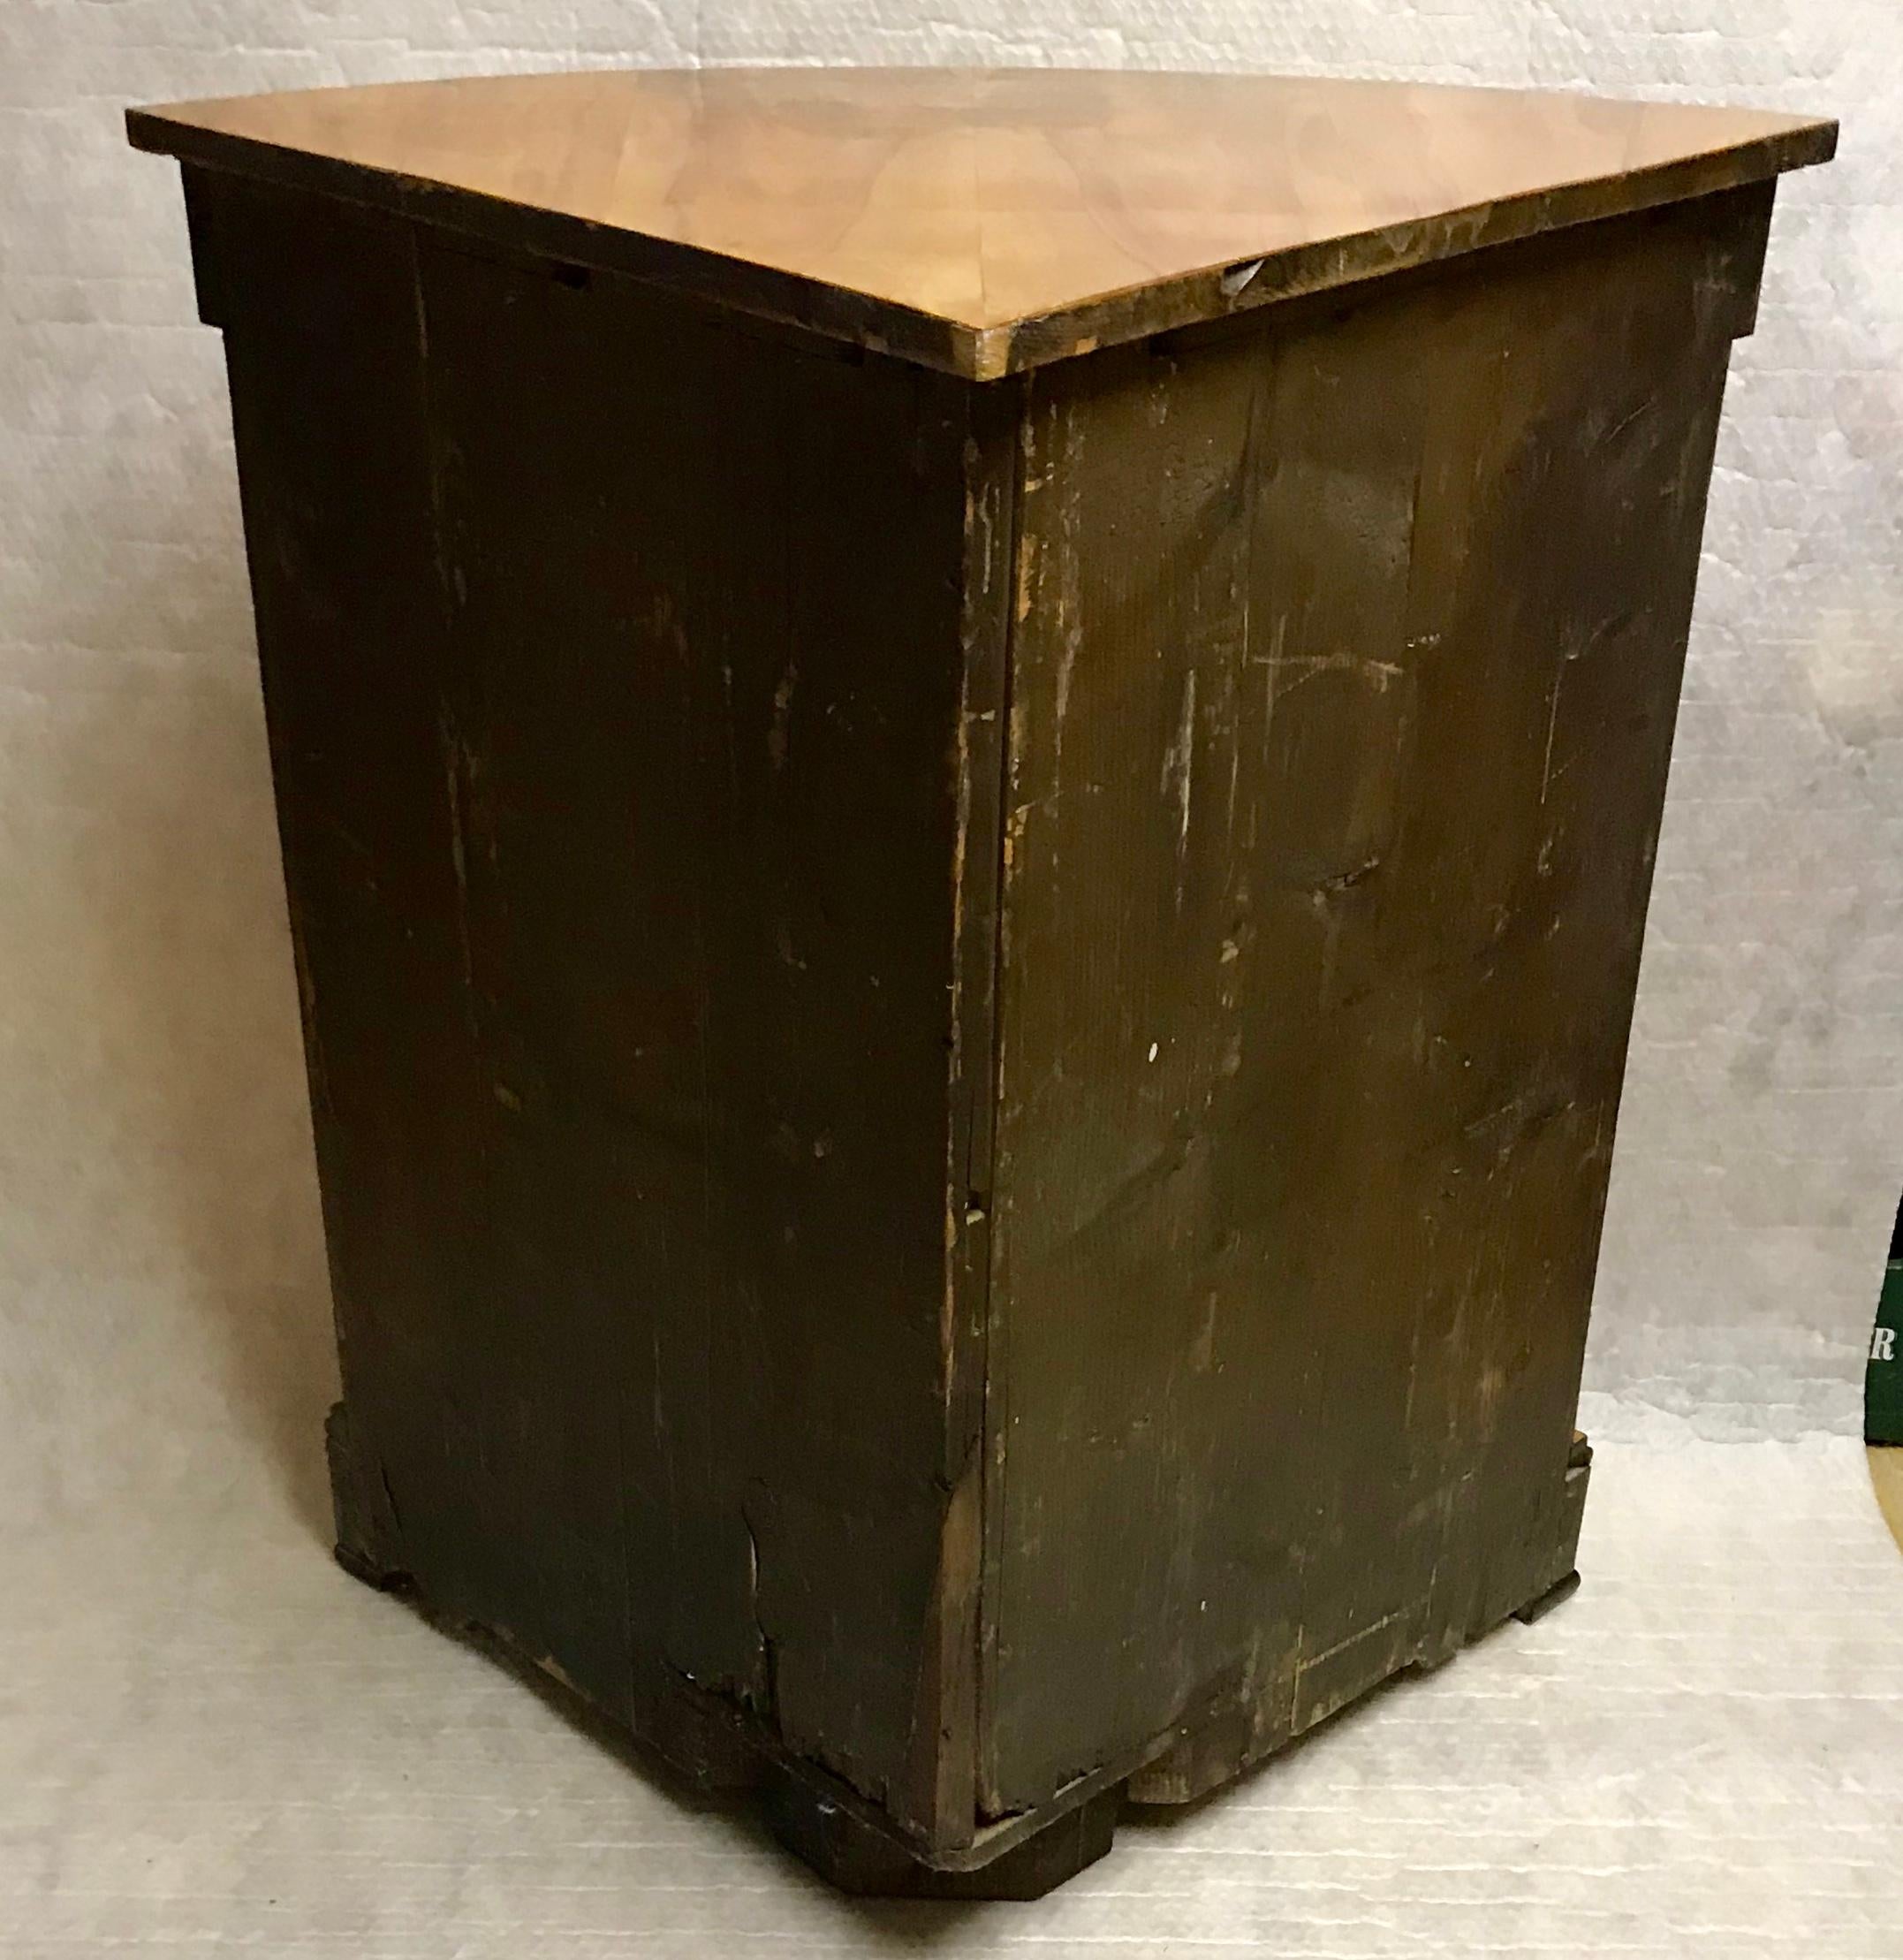 Biedermeier corner cabinet, Munich 1810-1820, cherrywood veneer with ebonized details, in very good condition with beautiful patina. The cabinet will be shipped from Germany, shipping costs to Boston are included.